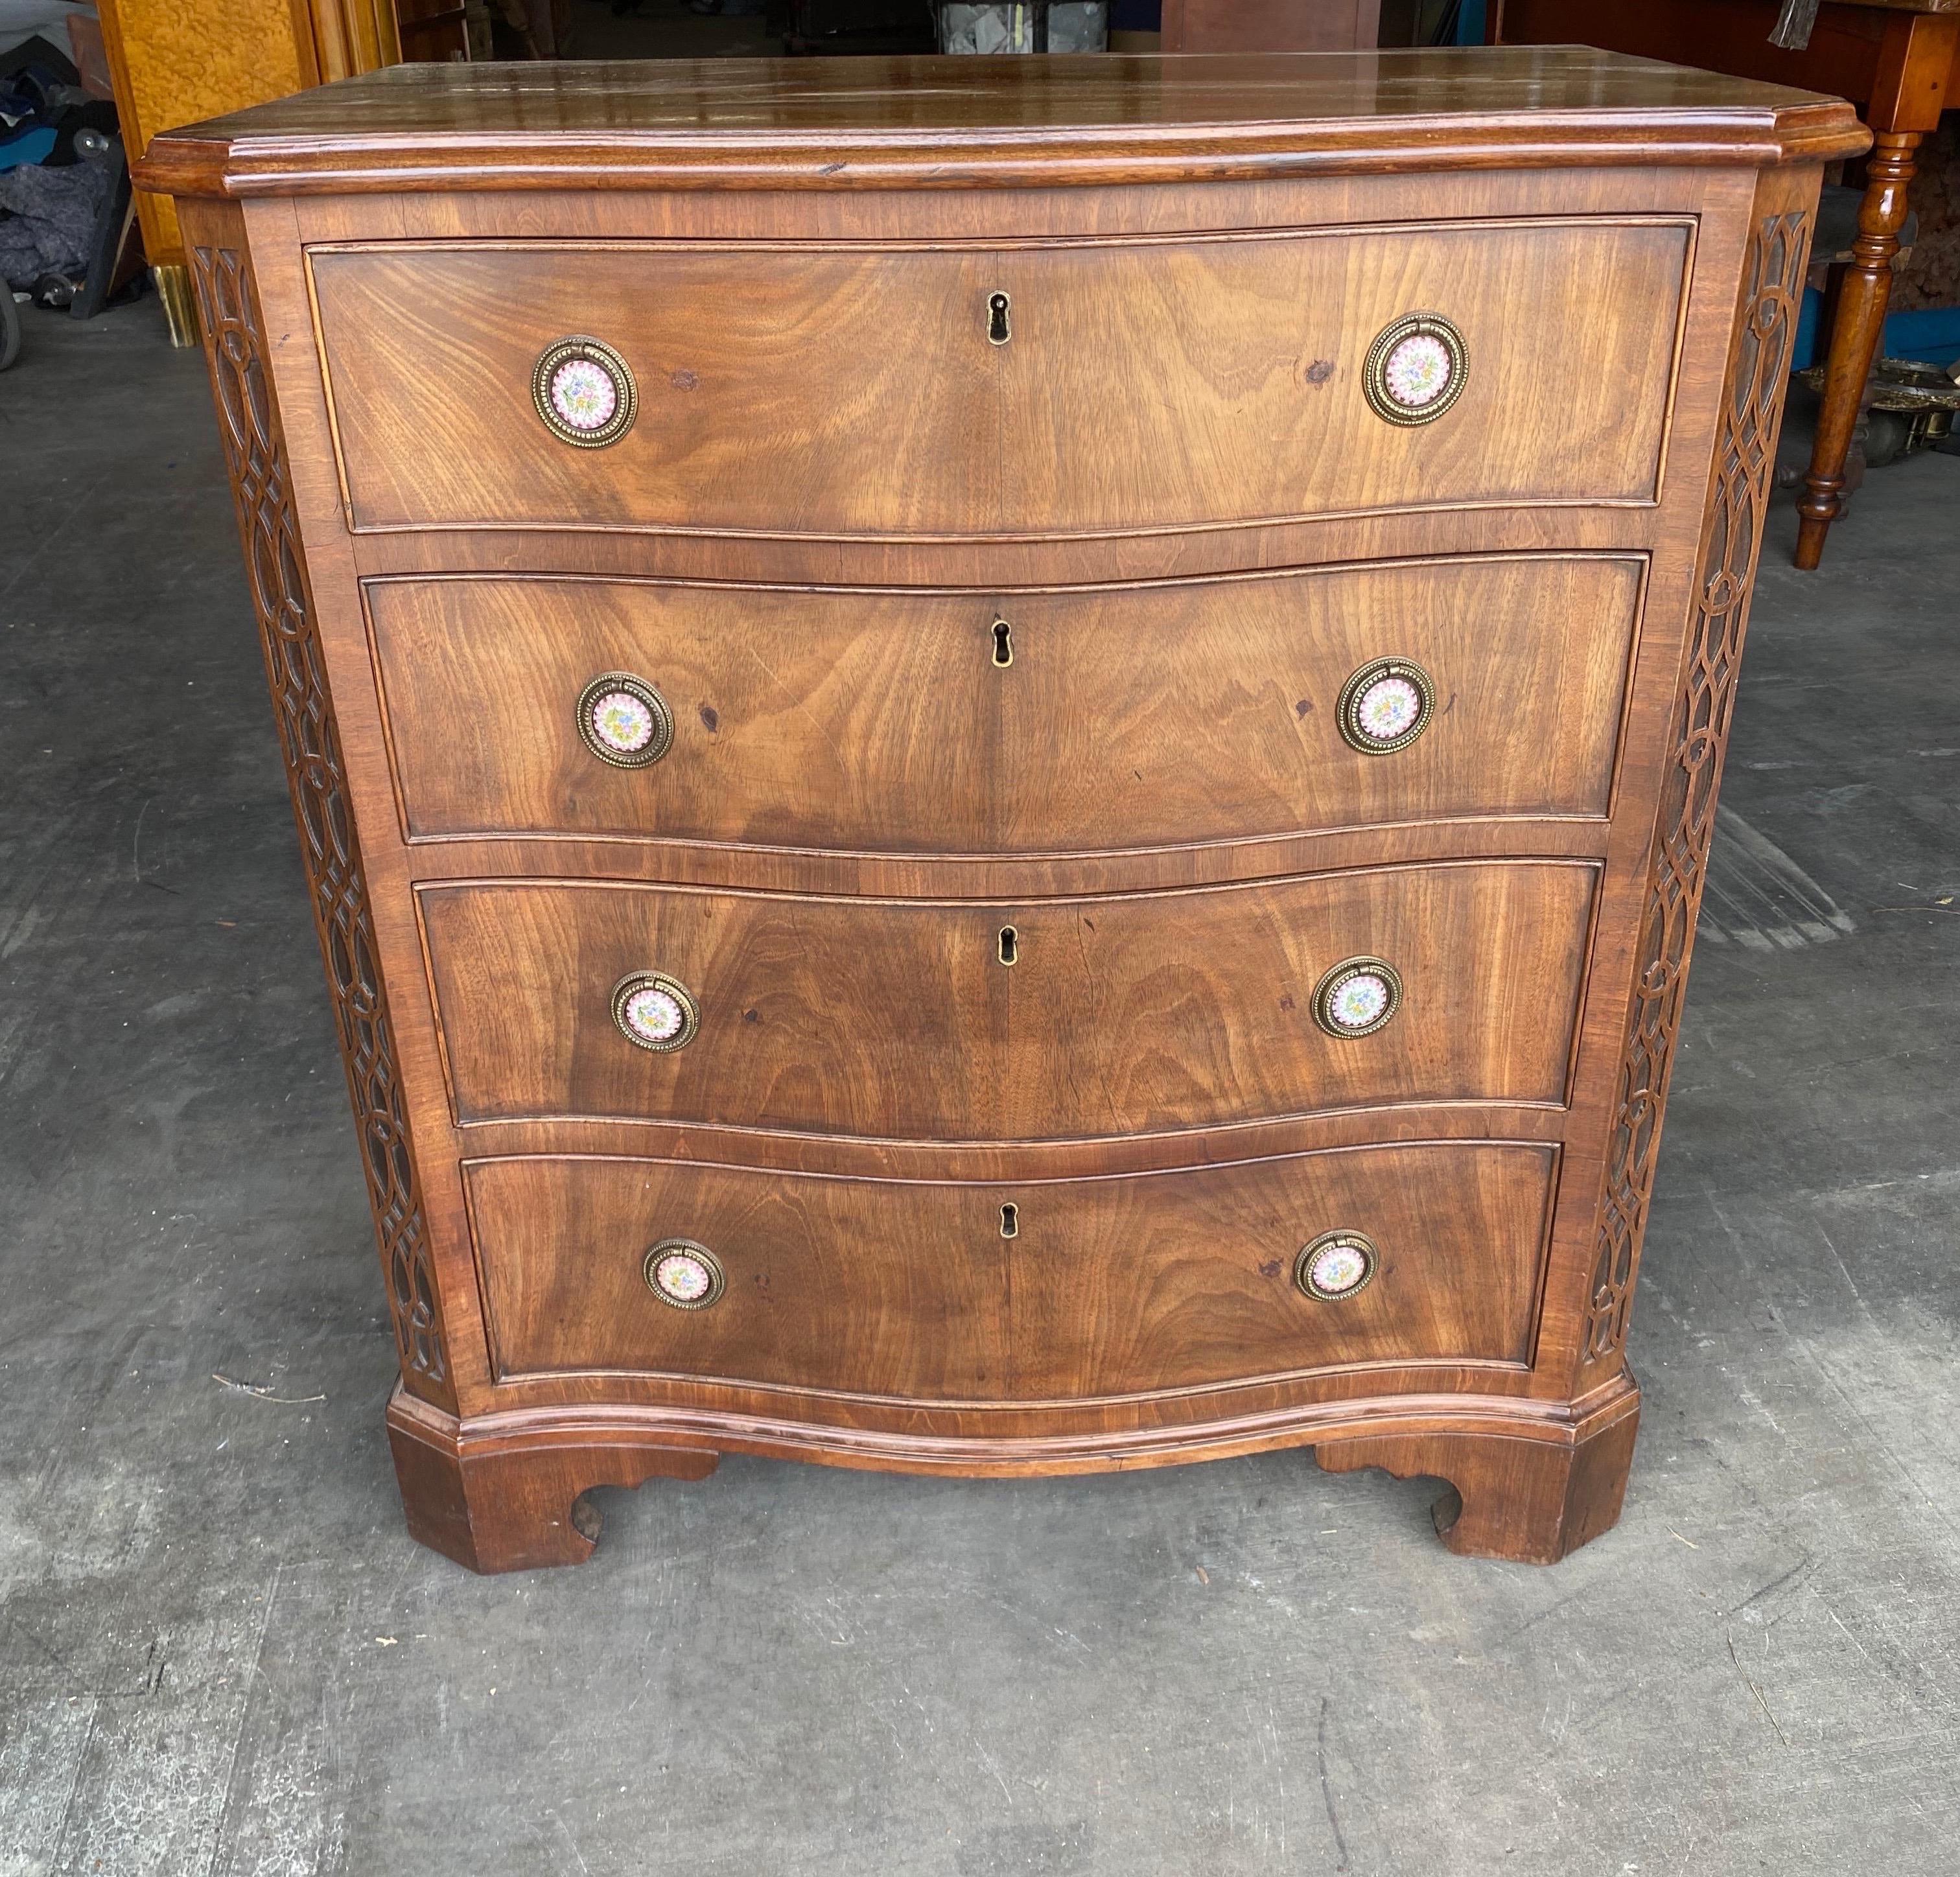 Great little late 18th-early 19th century petite serpentine Georgian mahogany dressing chest. This serpentine form chest is perfect bedside sized with figured mahogany drawer fronts, carved canted corners, bracket feet, working locks and a fitted